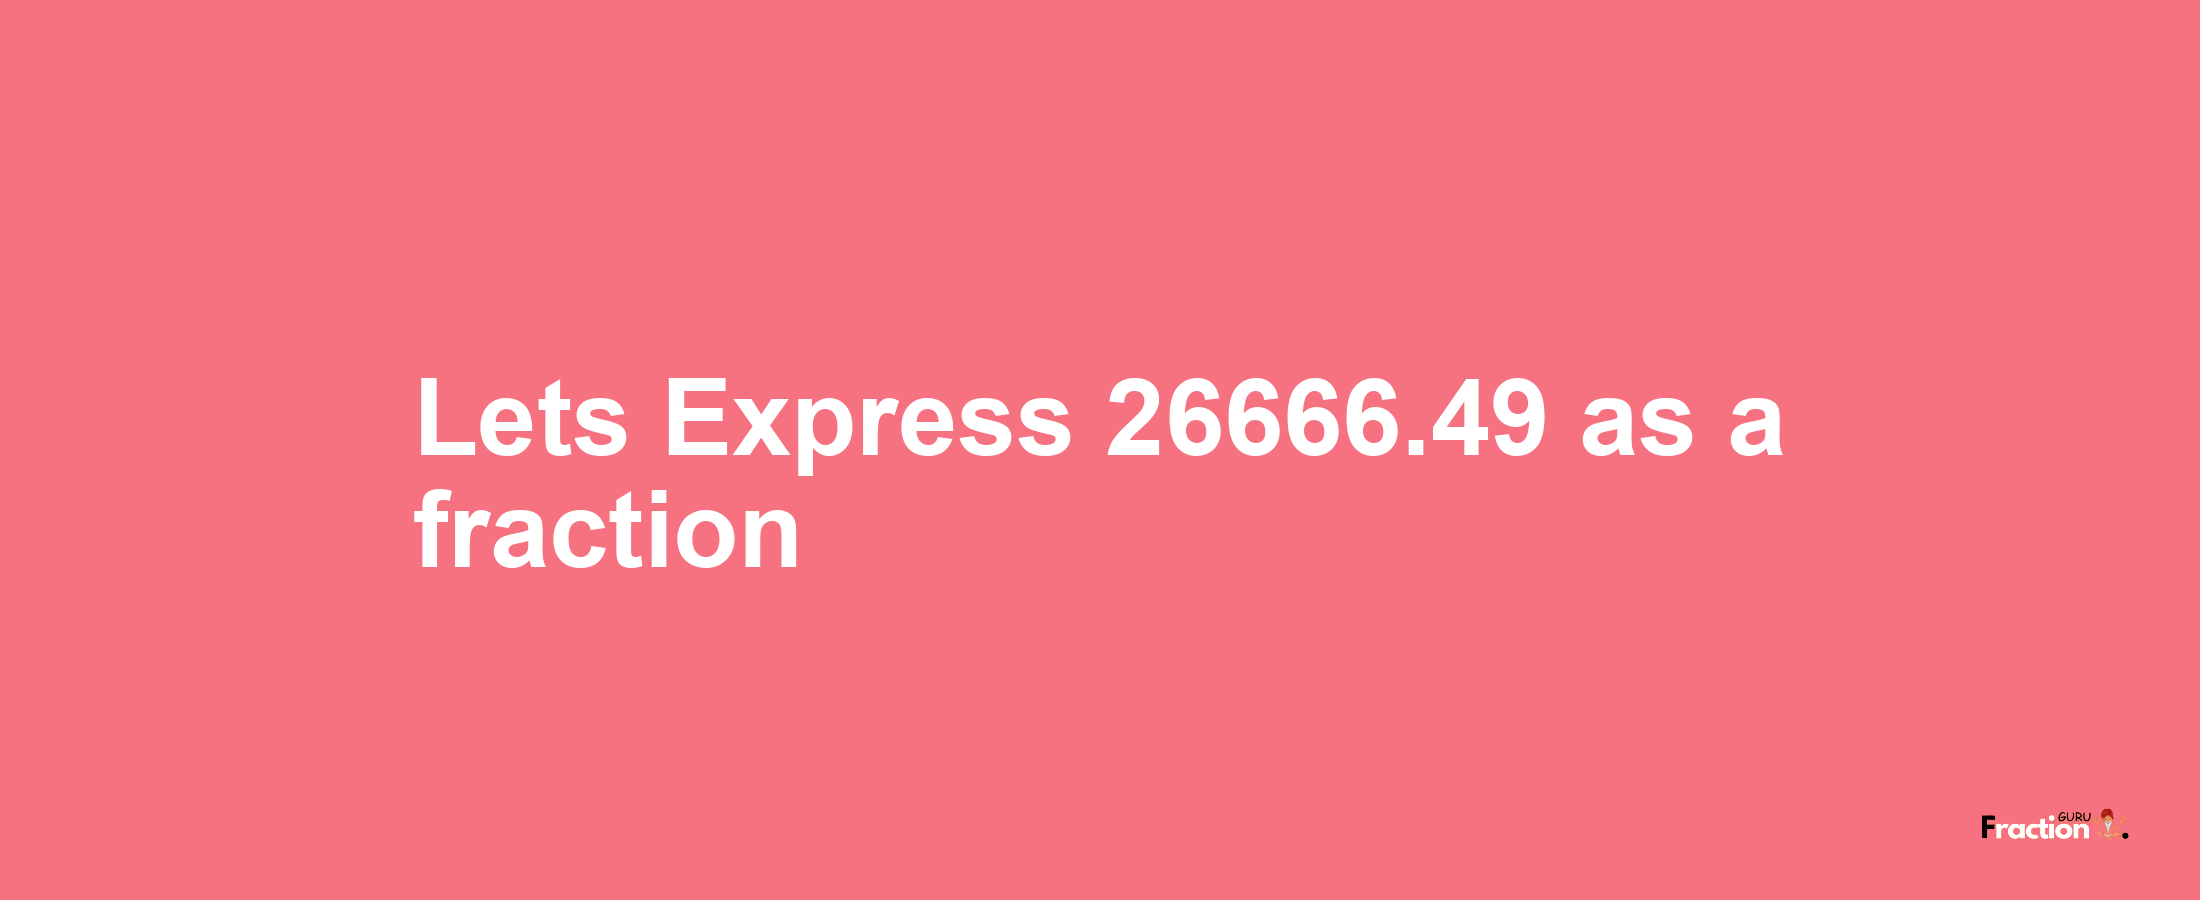 Lets Express 26666.49 as afraction